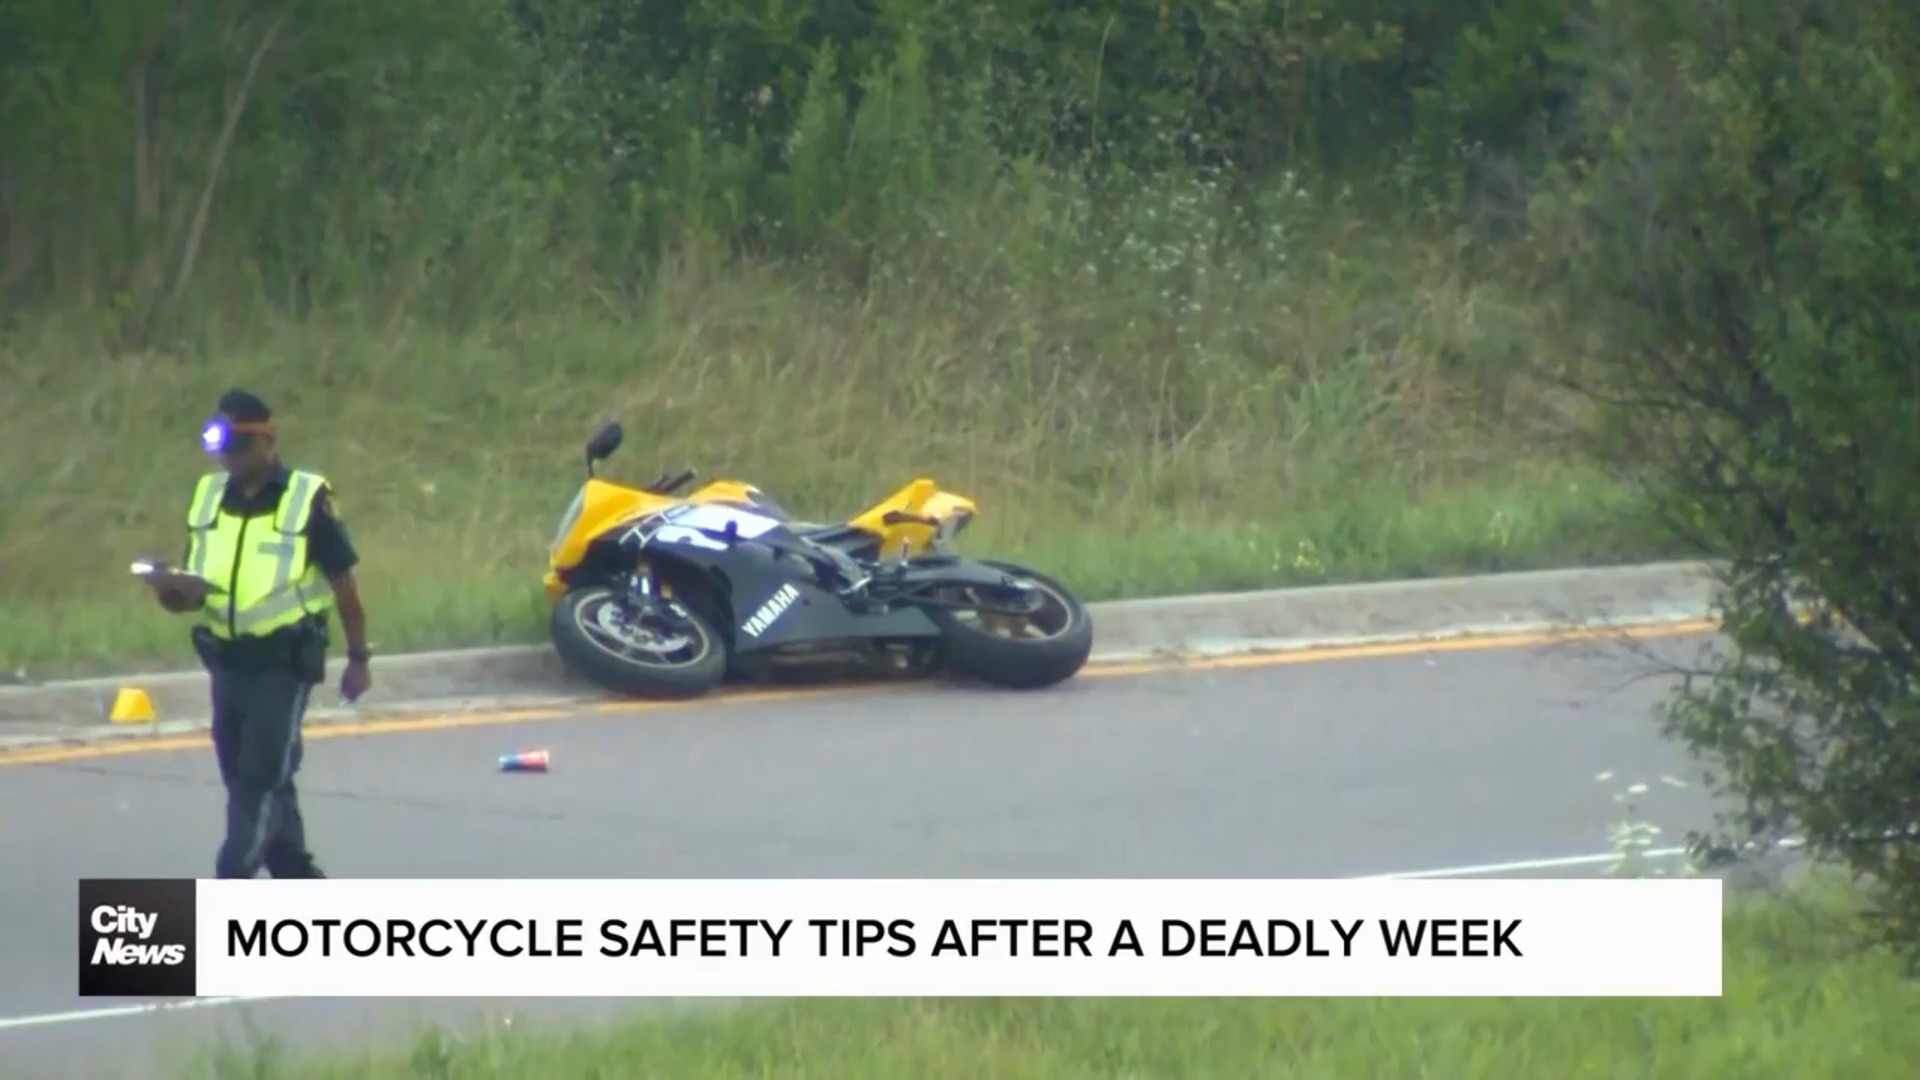 Police provide motorcycle safety tips